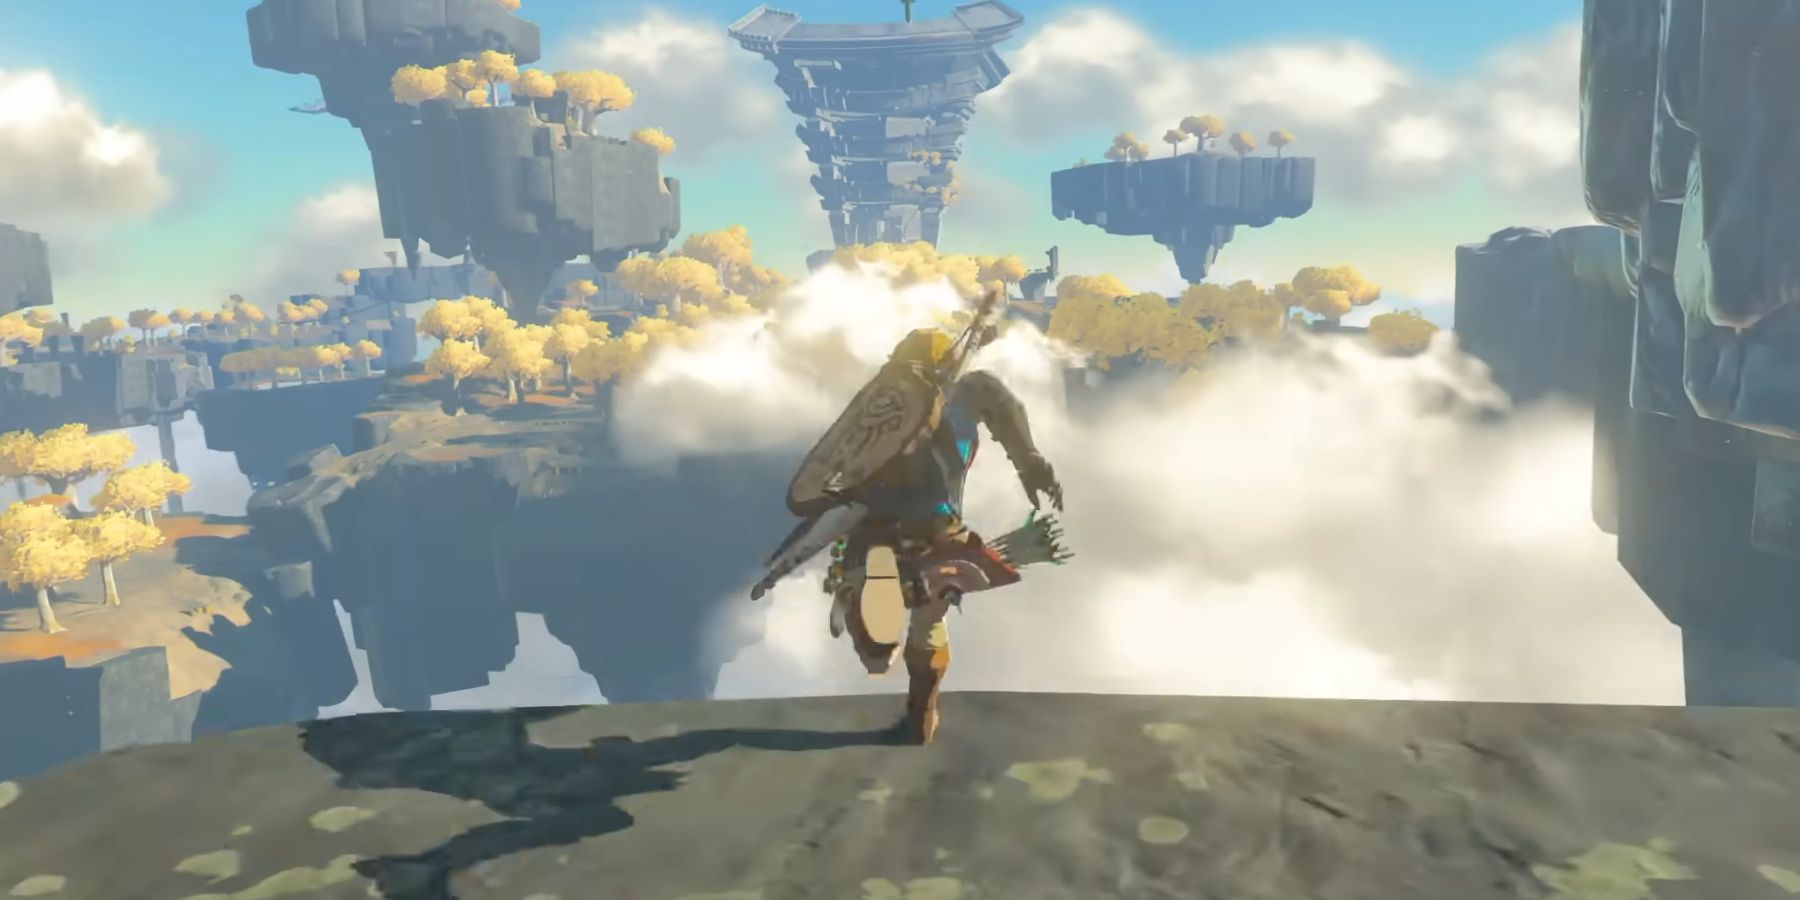 Link (middle) walks on the edge of a cliff surrounded by islands floating in the sky.  Image source: Nintendo